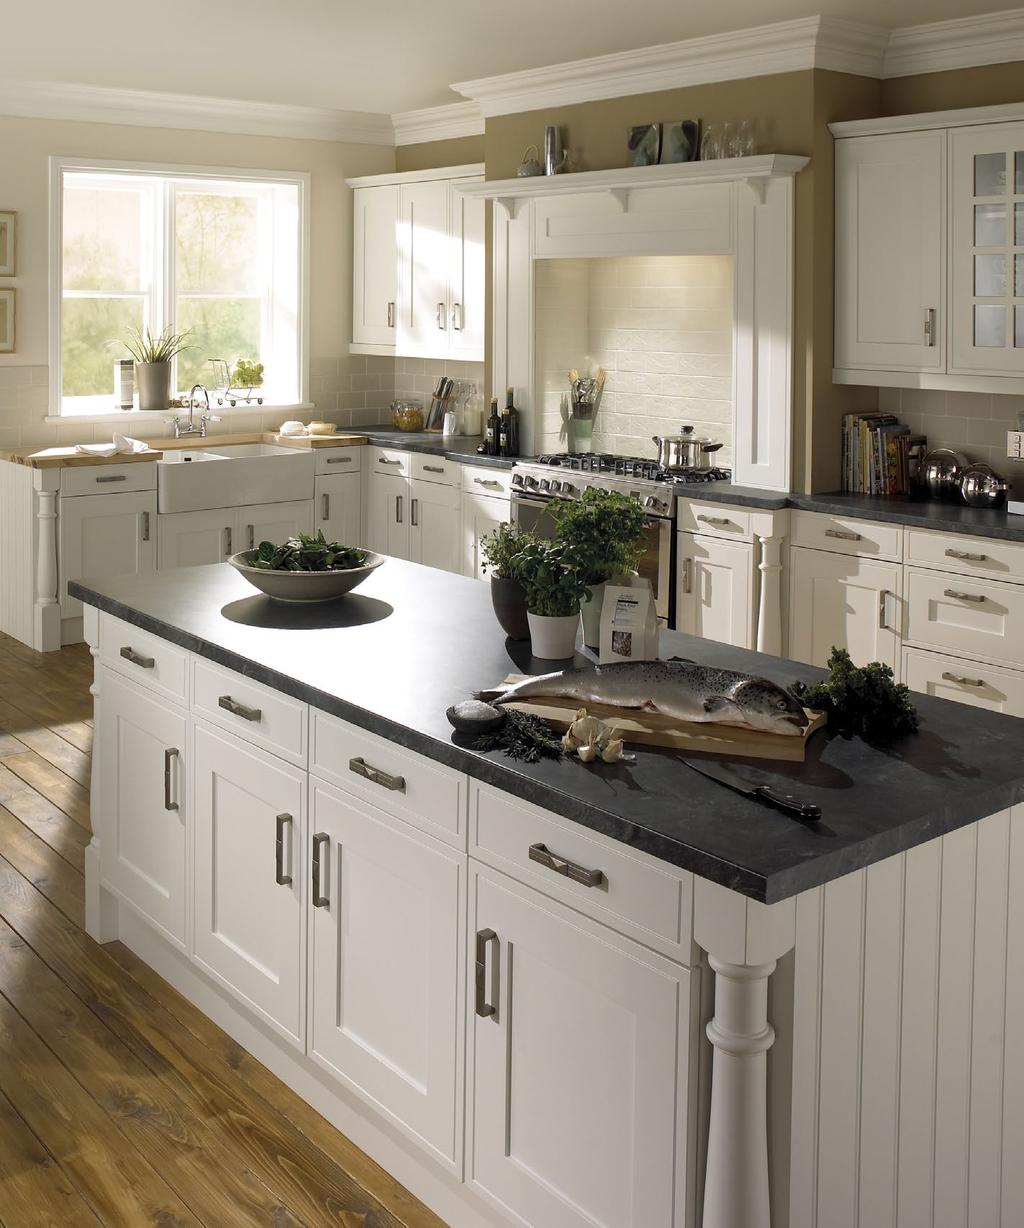 natural buttermilk finish, this country-styled kitchen complements the traditional home